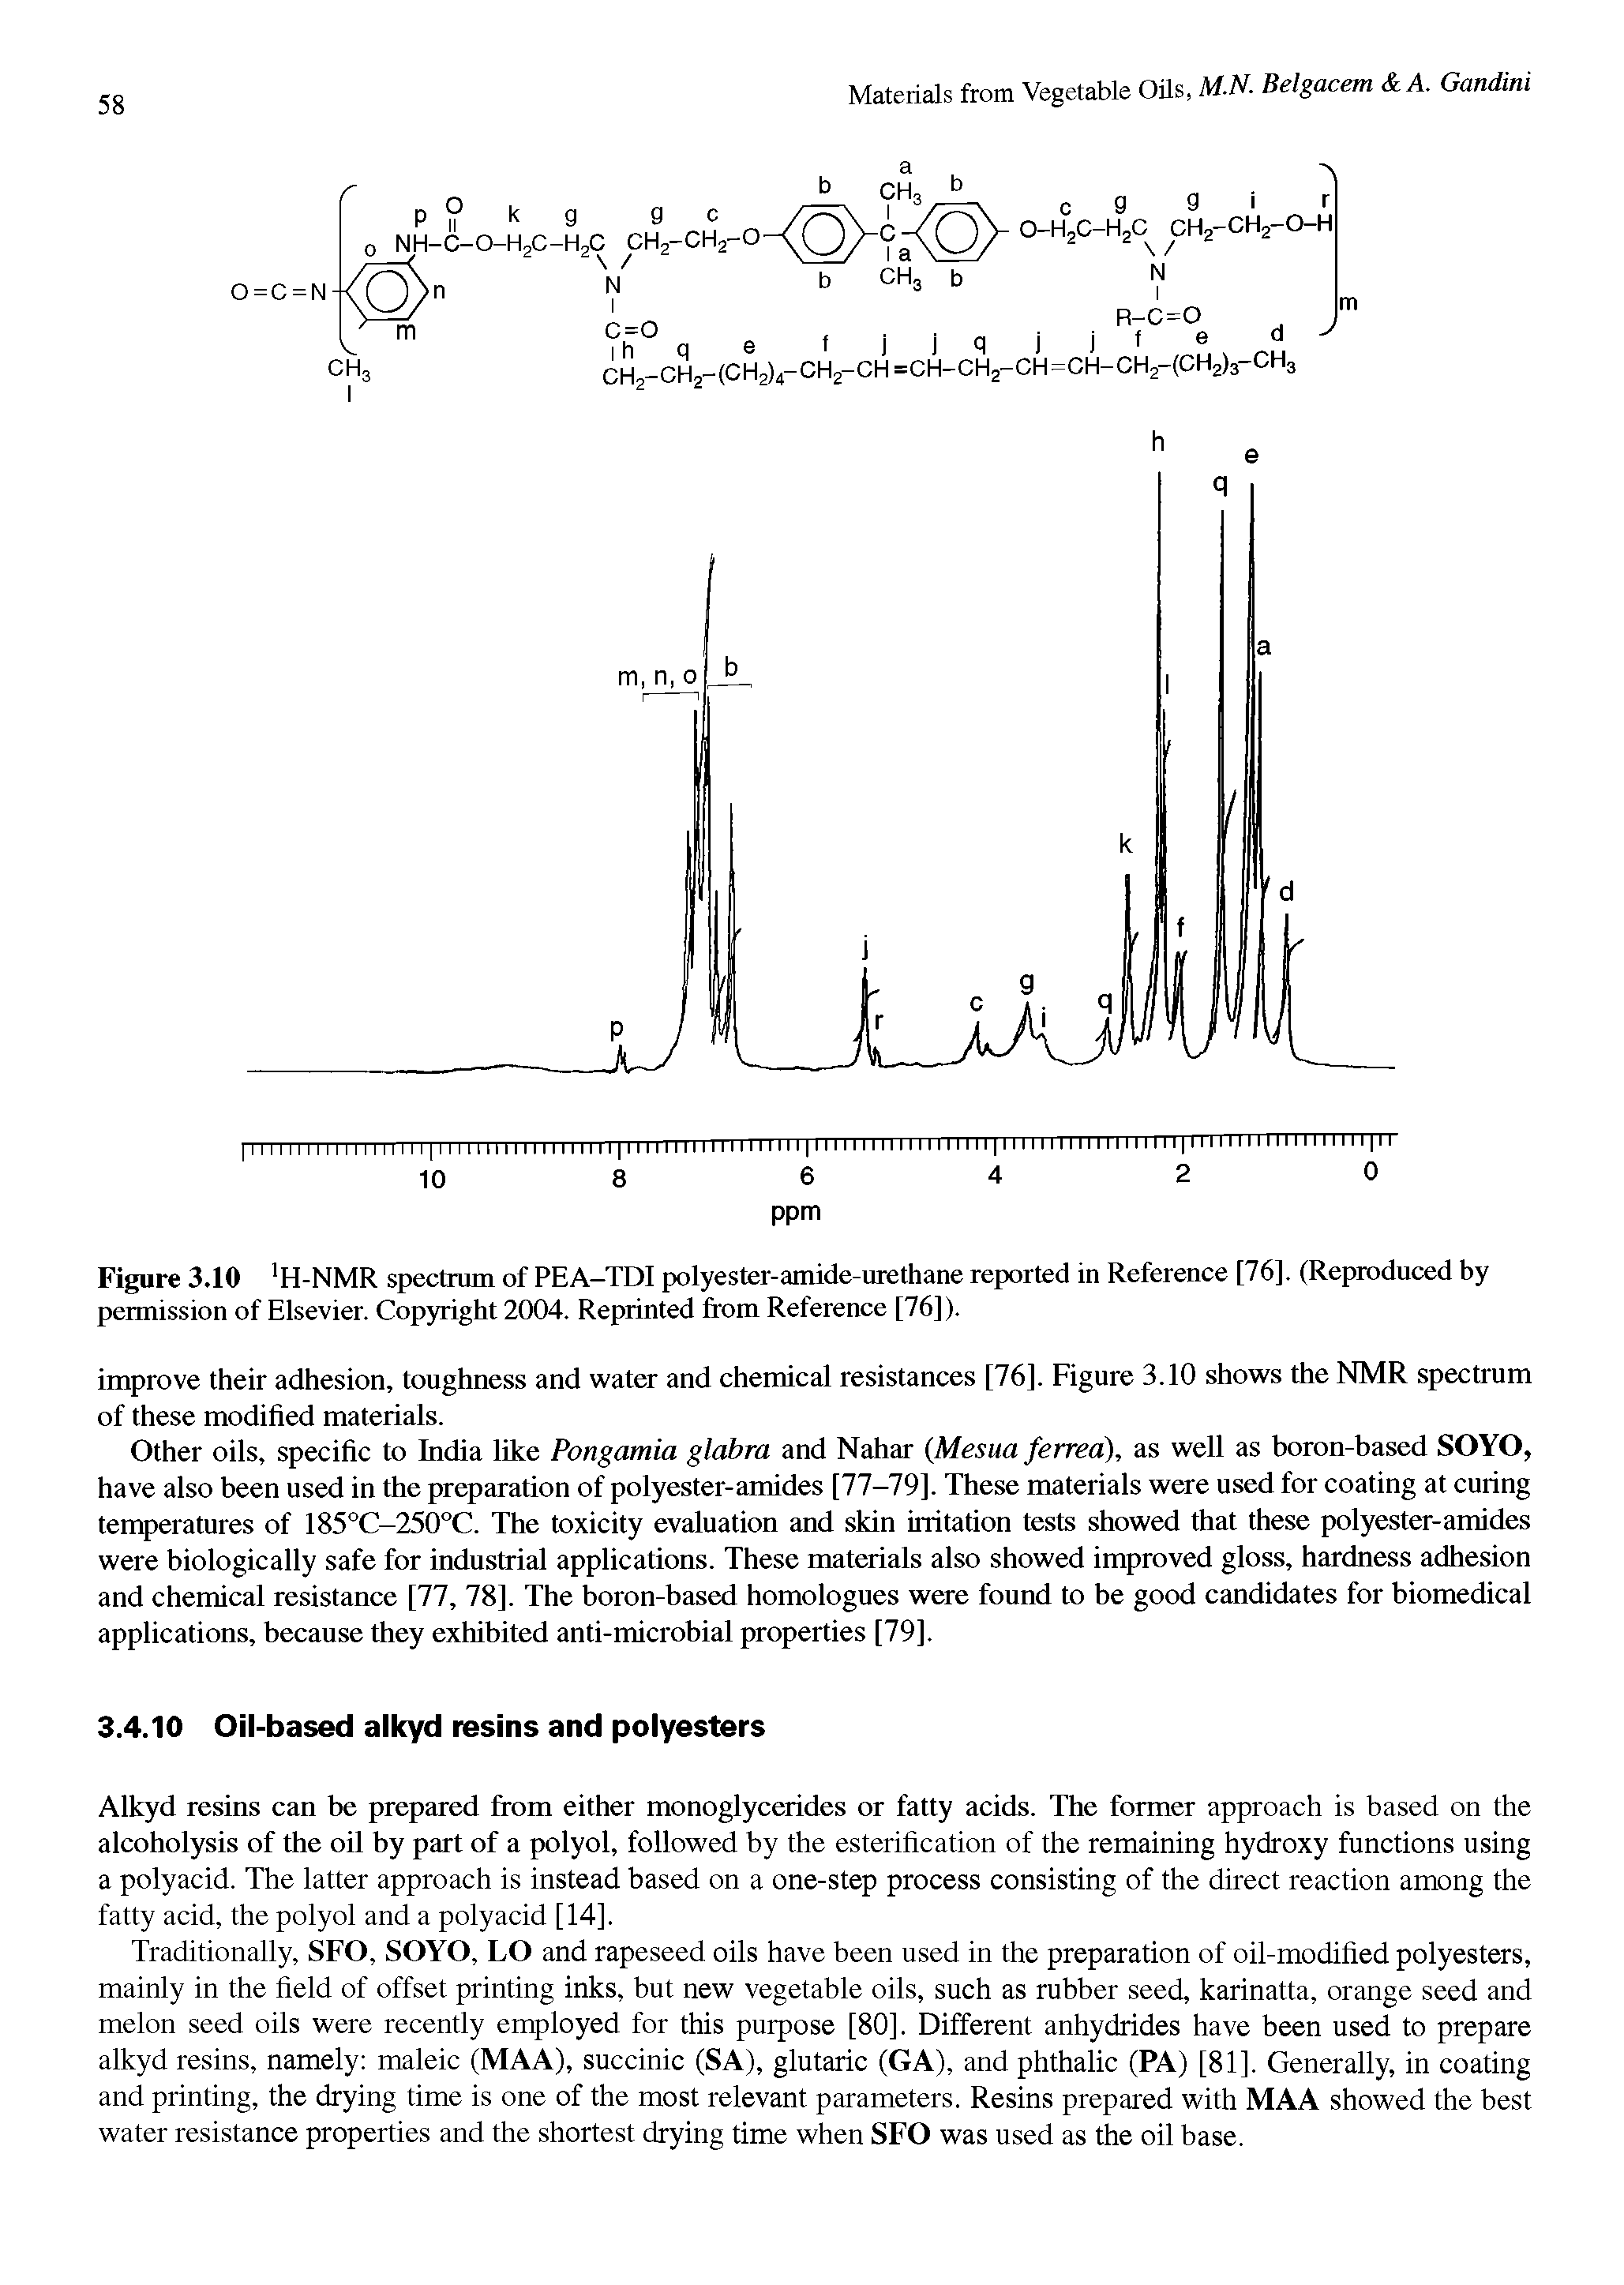 Figure 3.10 H-NMR spectrum of PEA-TDI polyester-amide-urethane reported in Reference [76]. (Reproduced by permission of Elsevier. Copyright 2004. Reprinted from Reference [76]).